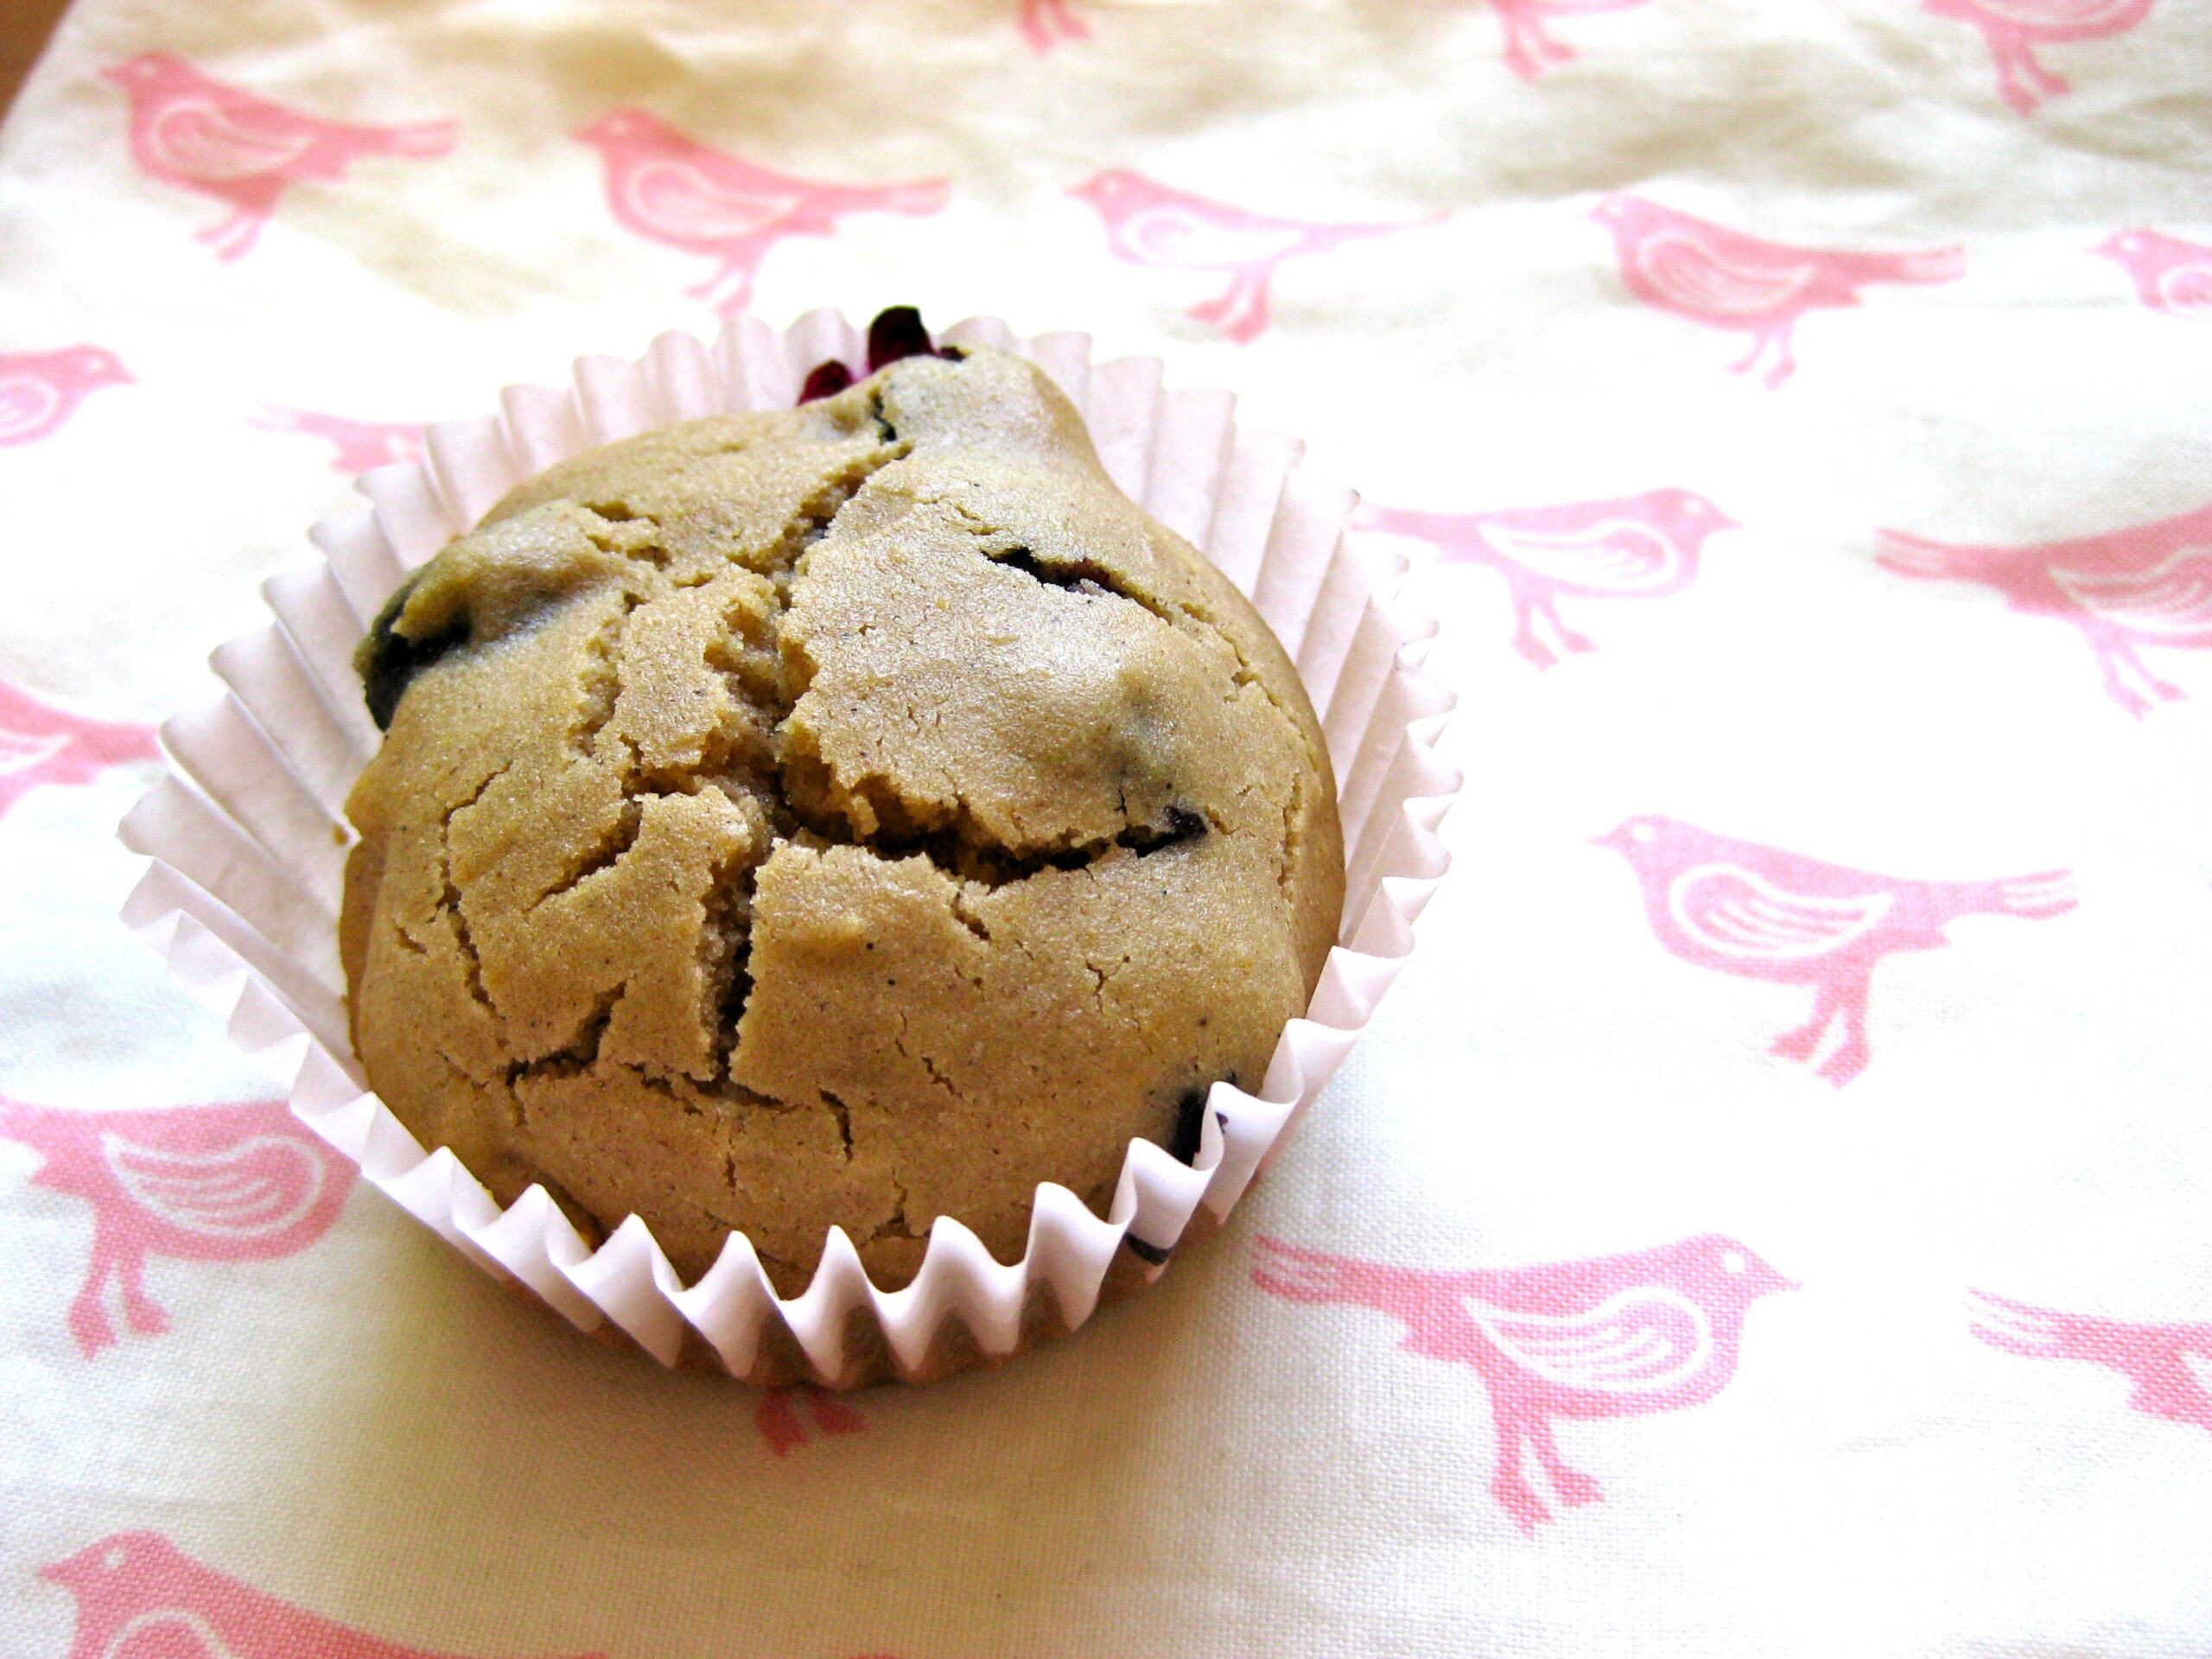 Gluten-free Blueberry Muffins: A Delectable Healthy Treat